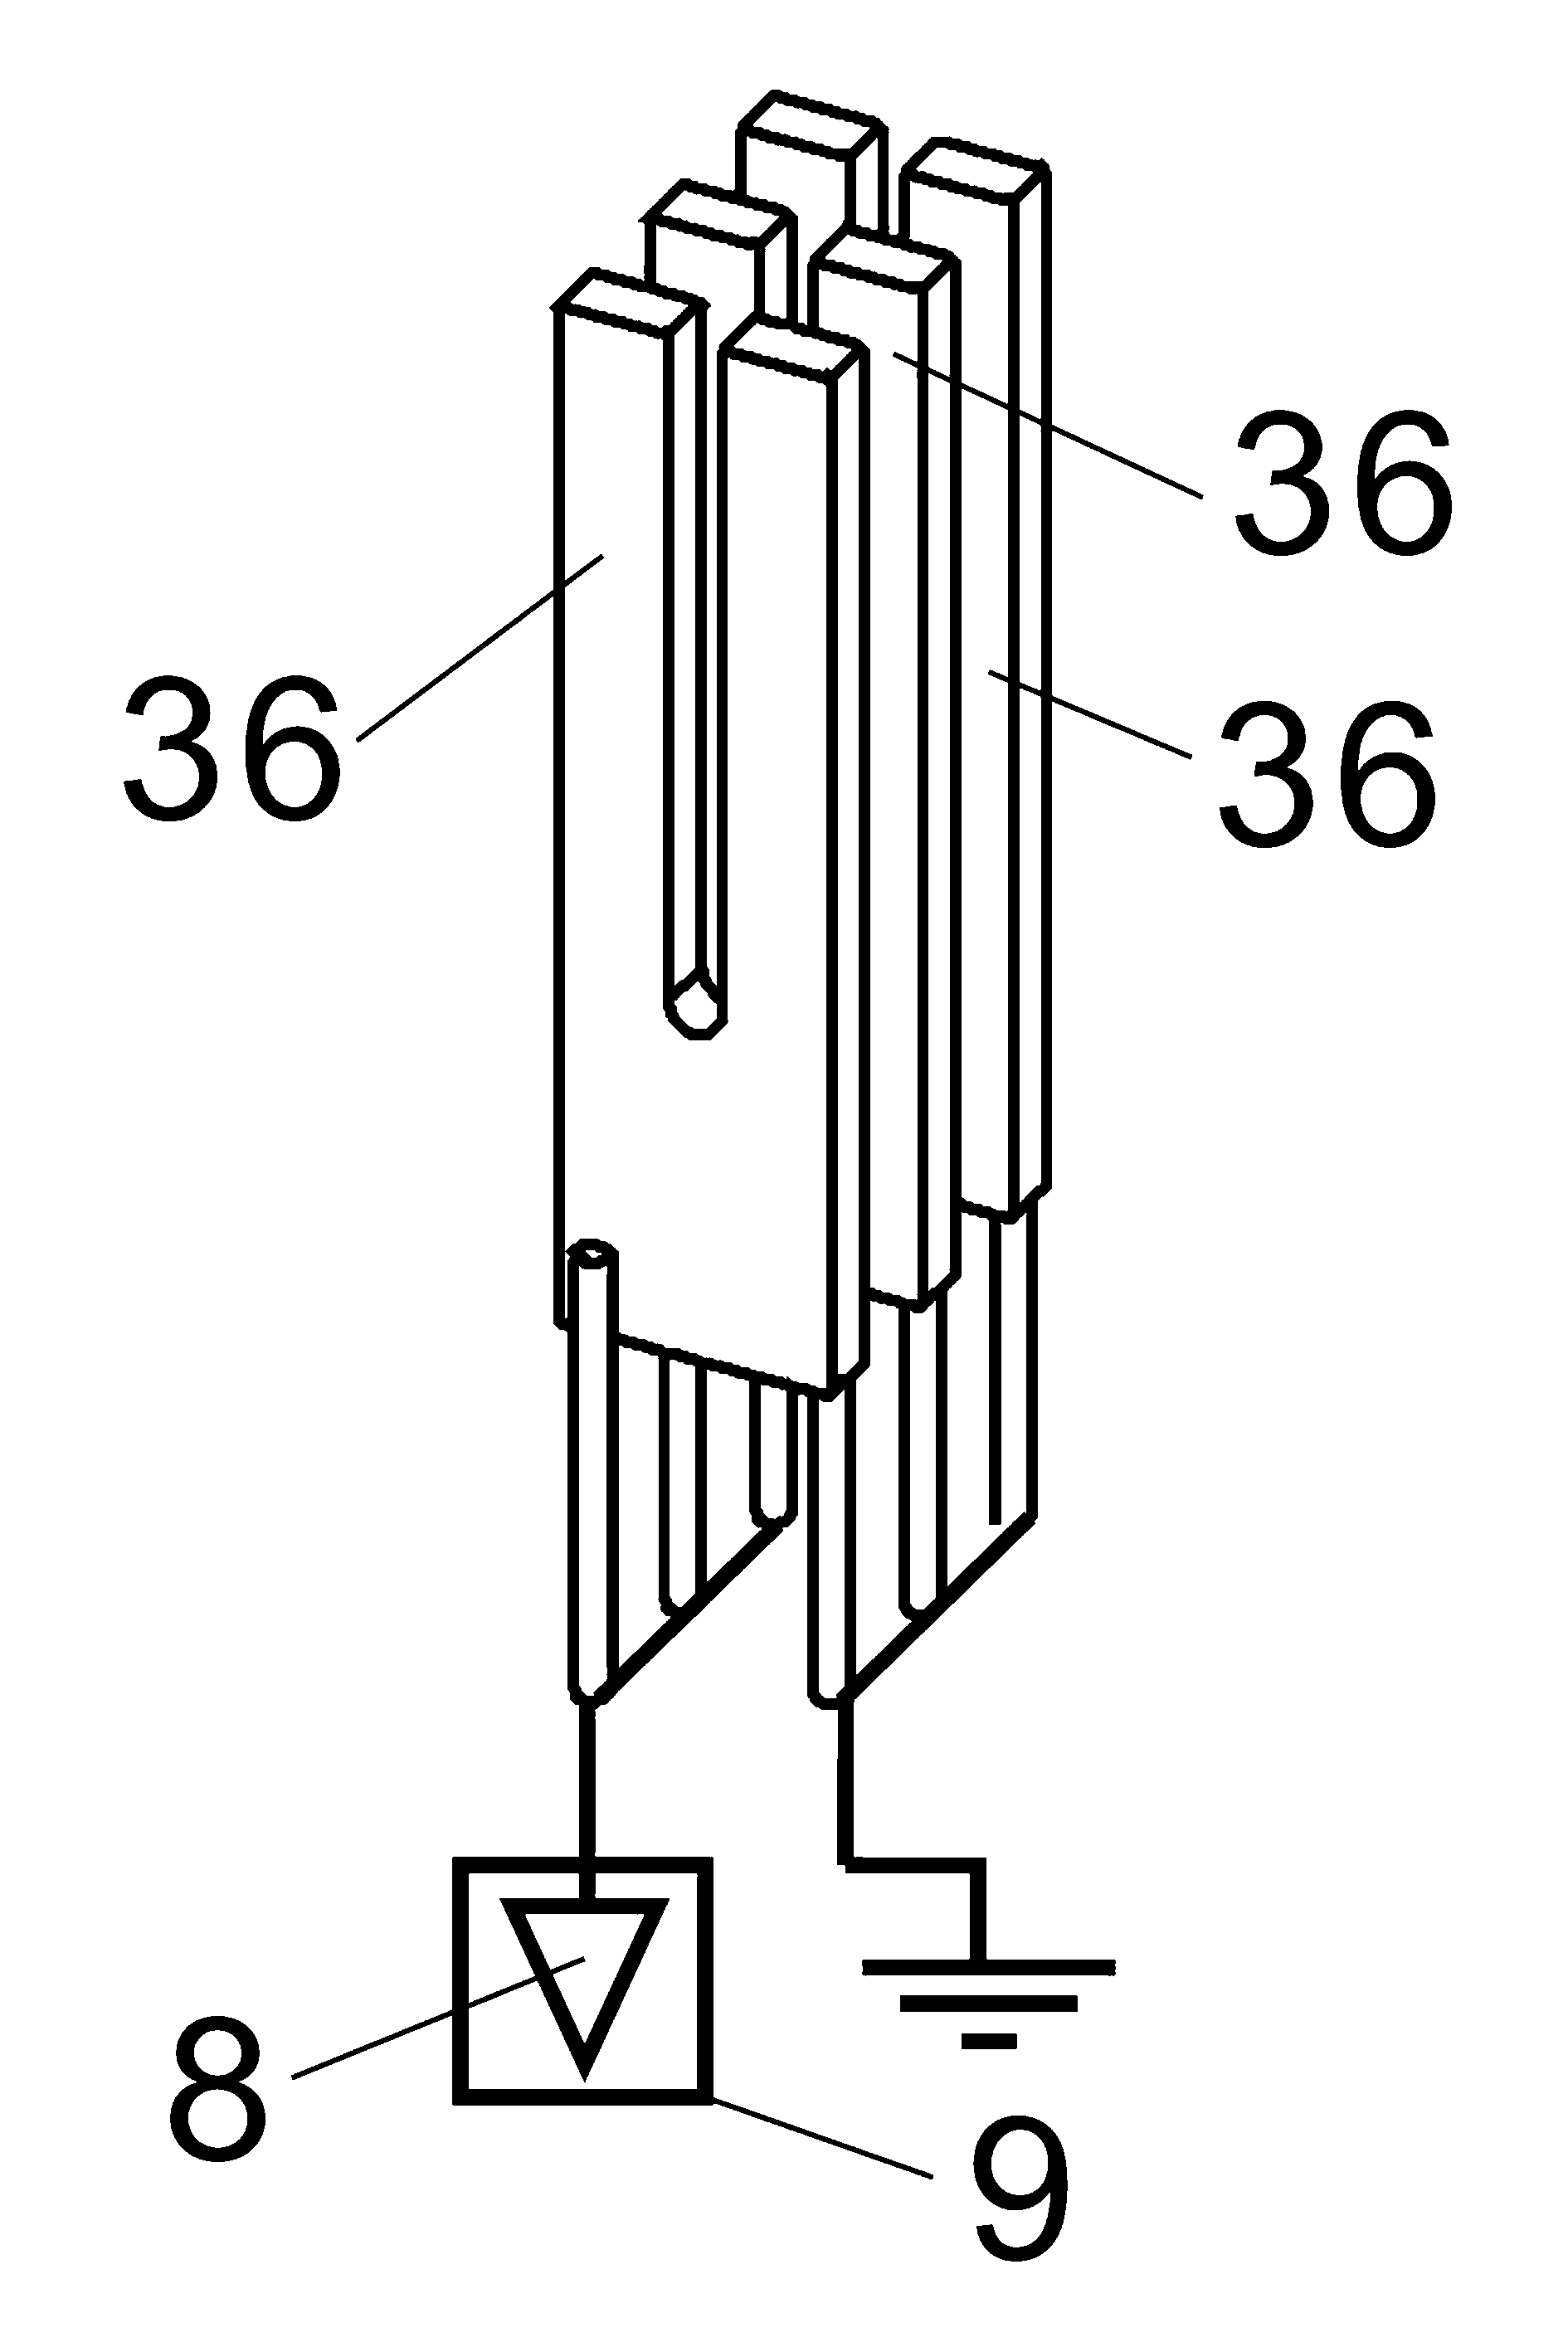 Multi-quartz-crystal-oscillator spectral phonometer and gas detection device employing same